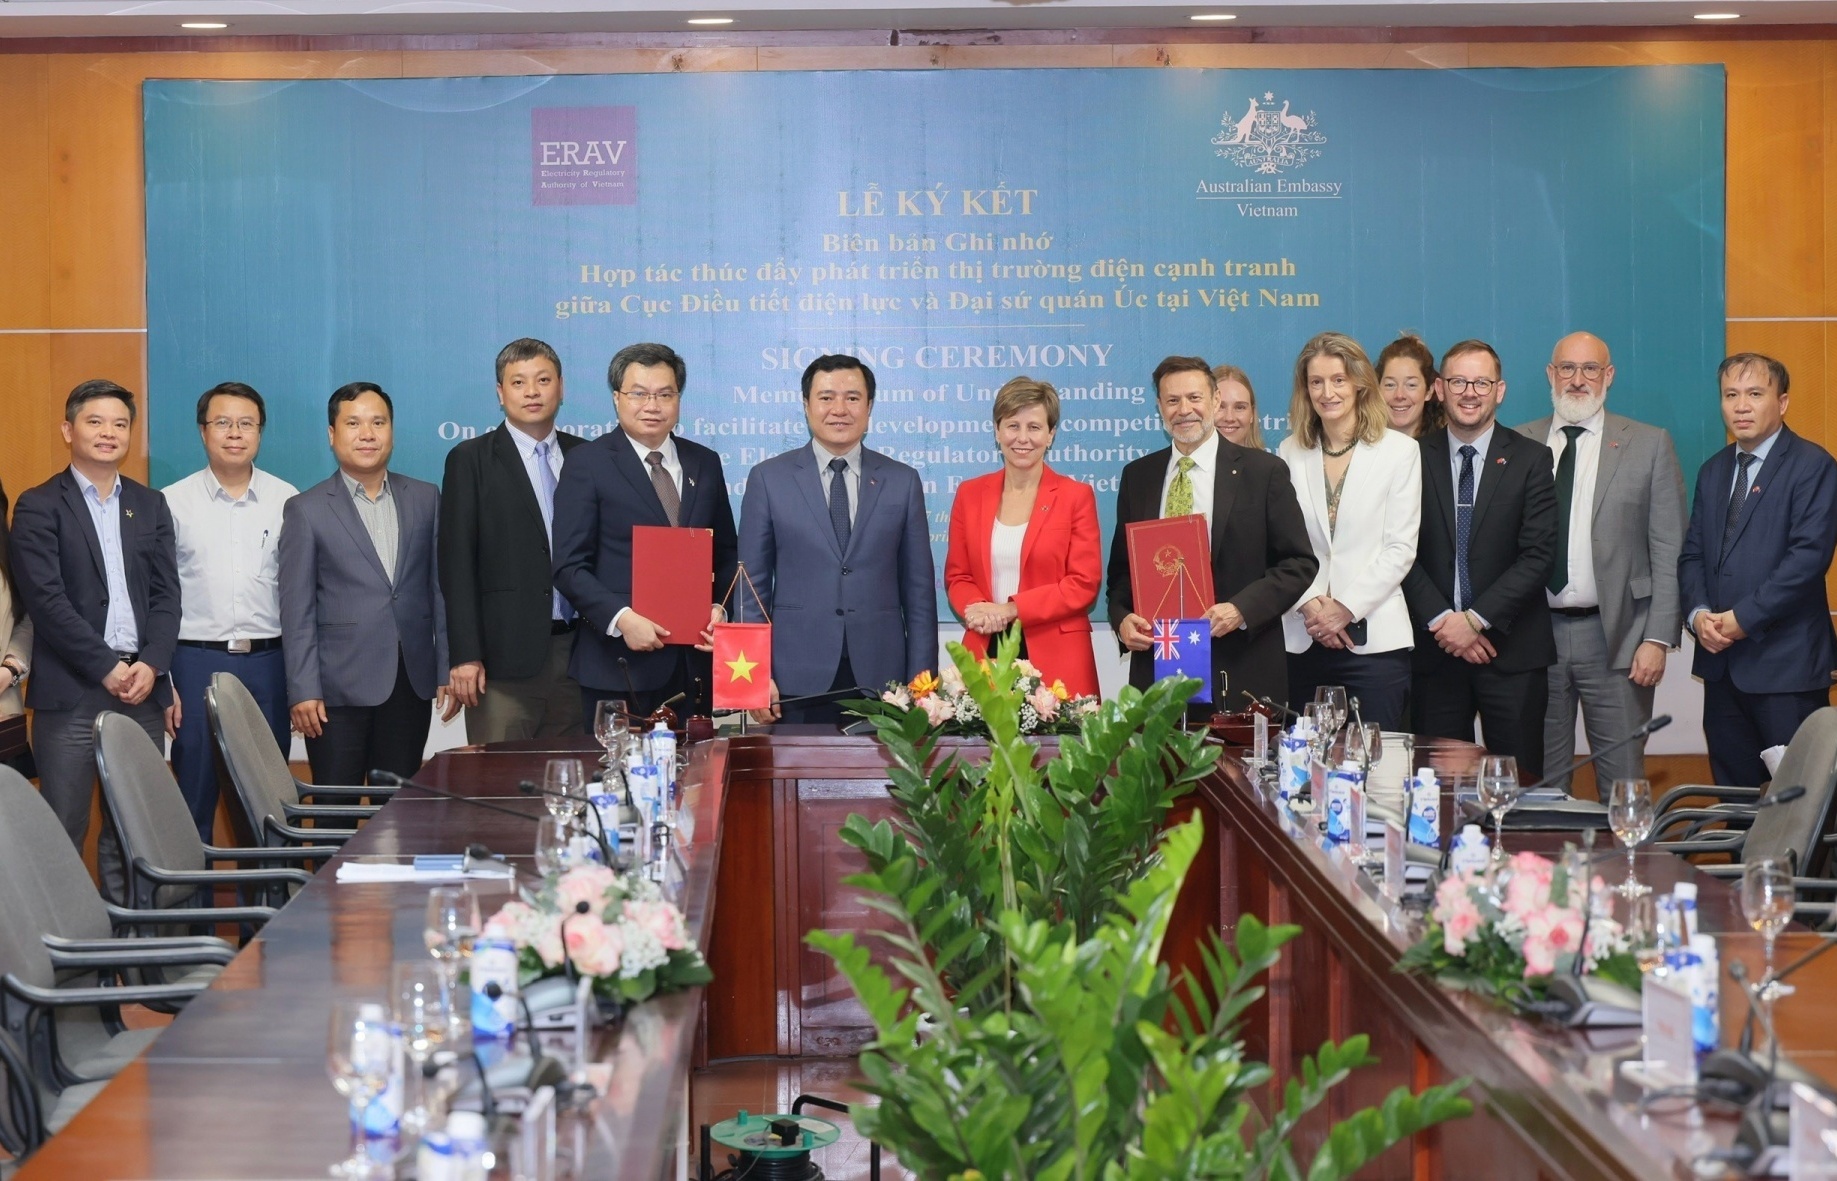 Australia and Vietnam to develop competitive electricity market